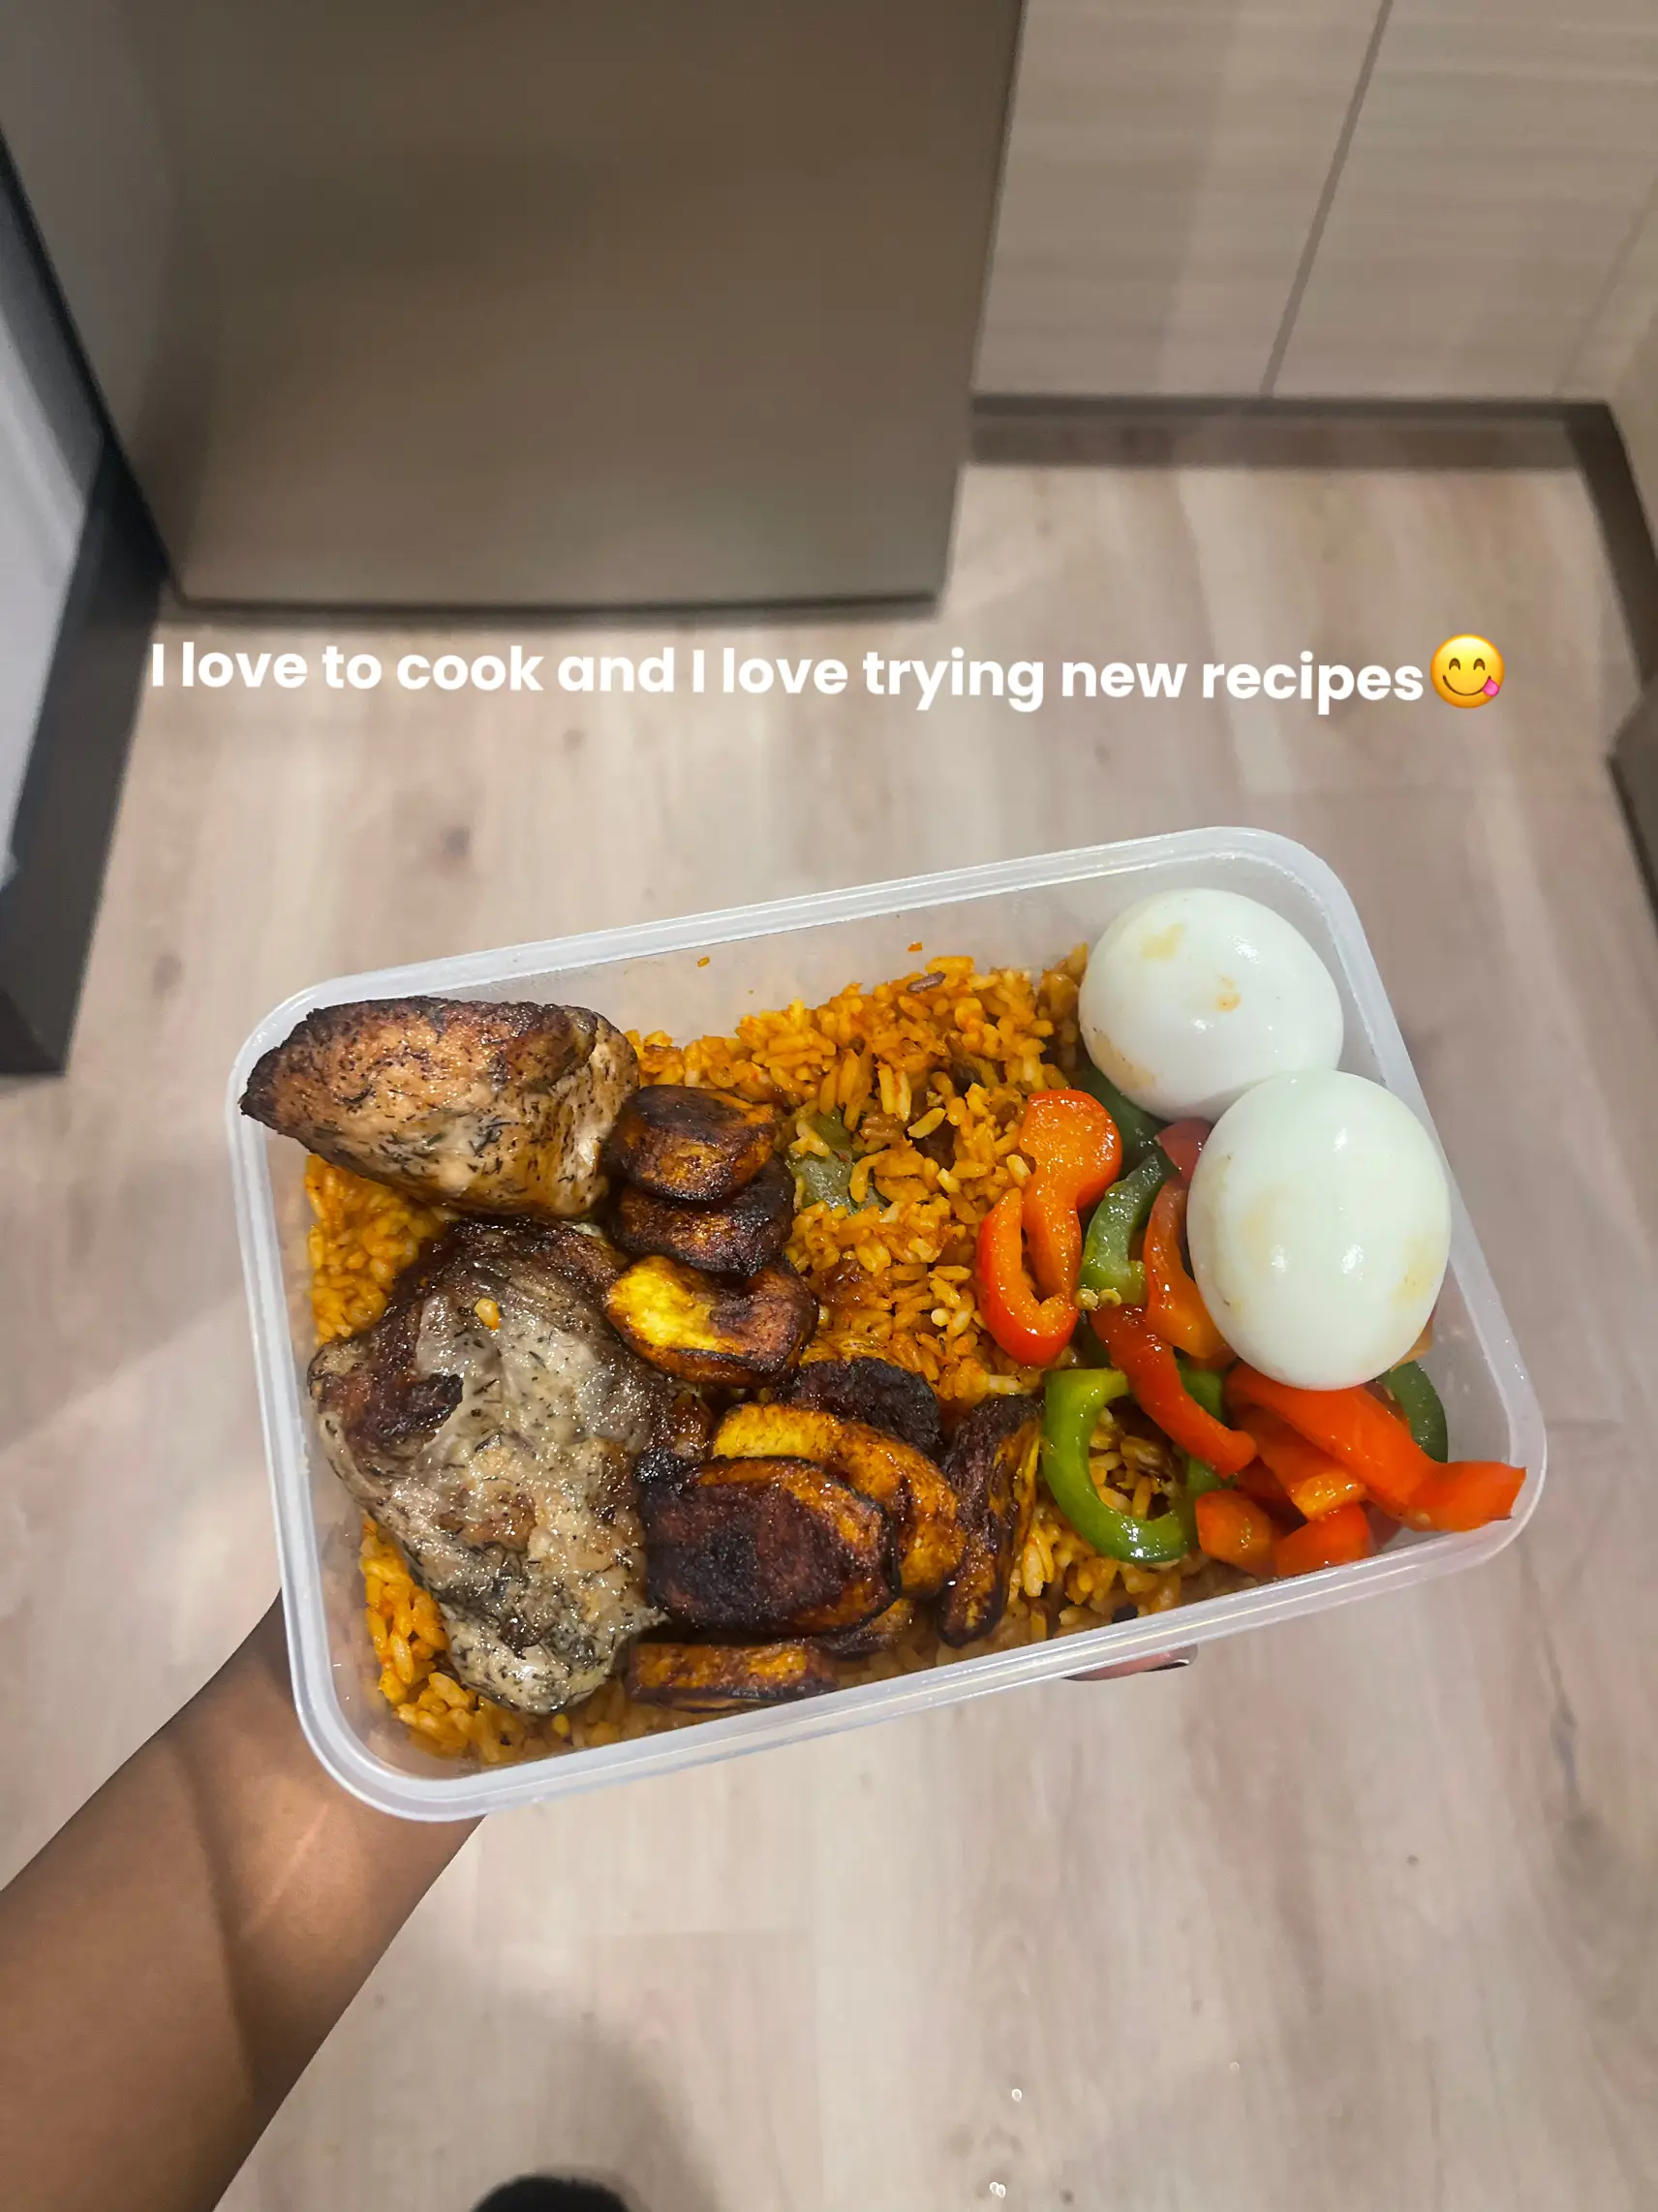  A person is holding a container of food with a rice dish and a meat dish. The container is described as having a rice dish and a meat dish. The person holding the container is also